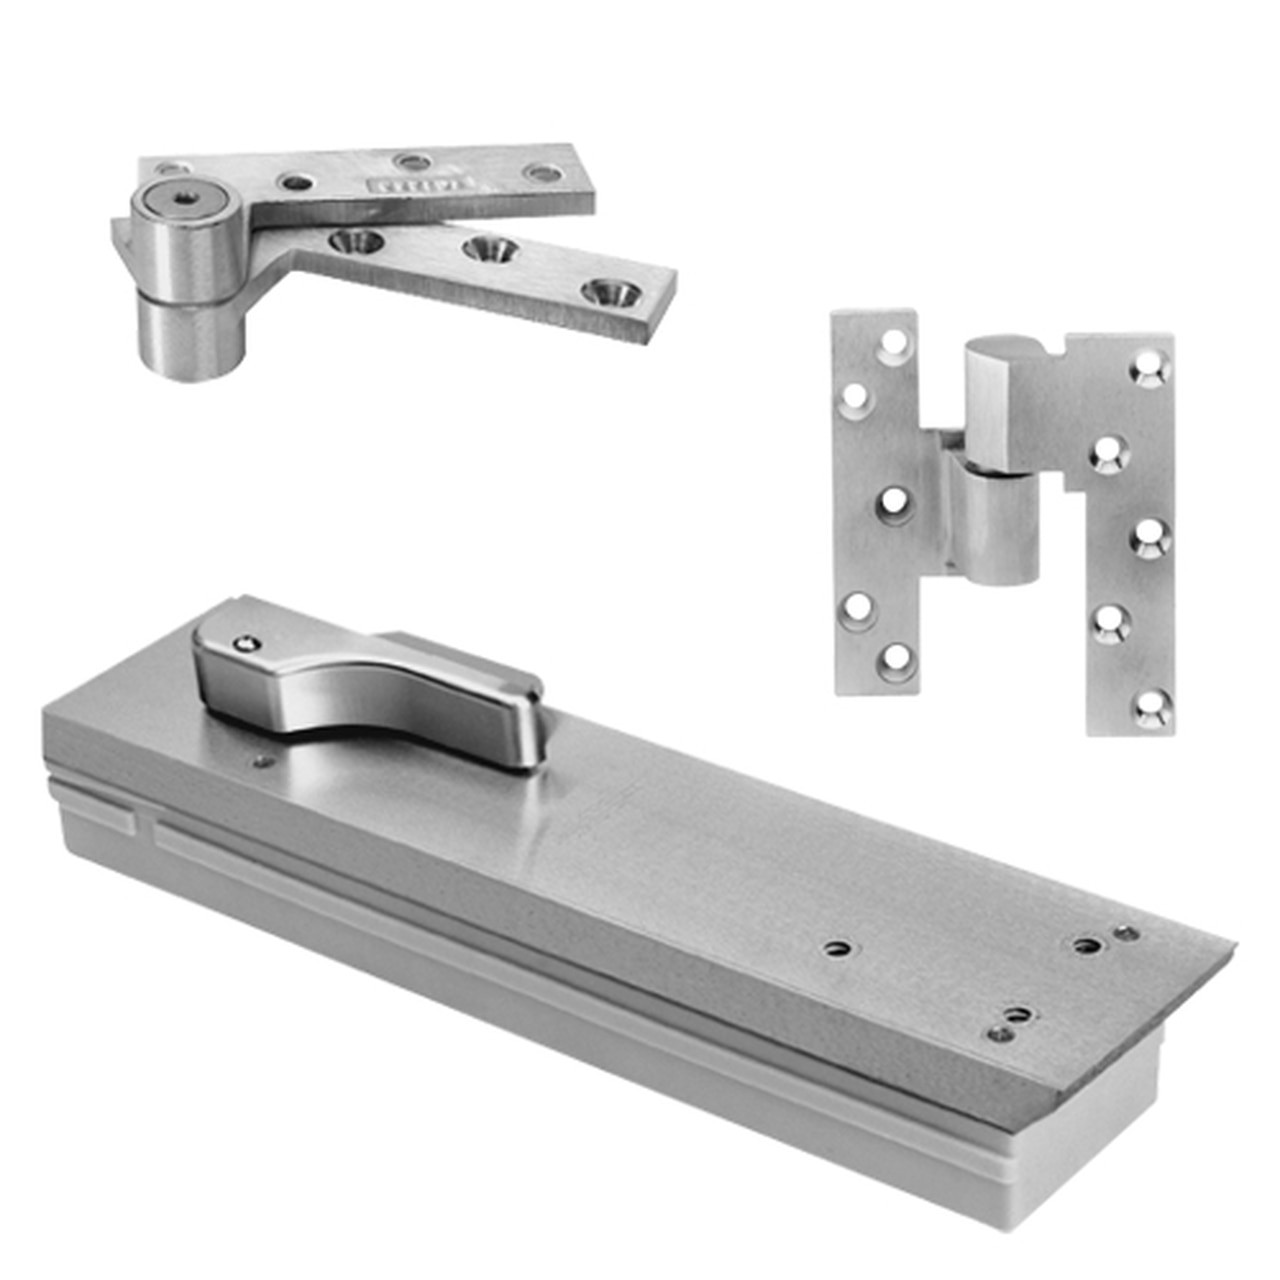 FQ5103NBC-LFP-LCC-LH-626 Rixson Q51 Series Fire Rated 3/4" Offset Hung Shallow Depth Floor Closers in Satin Chrome Finish